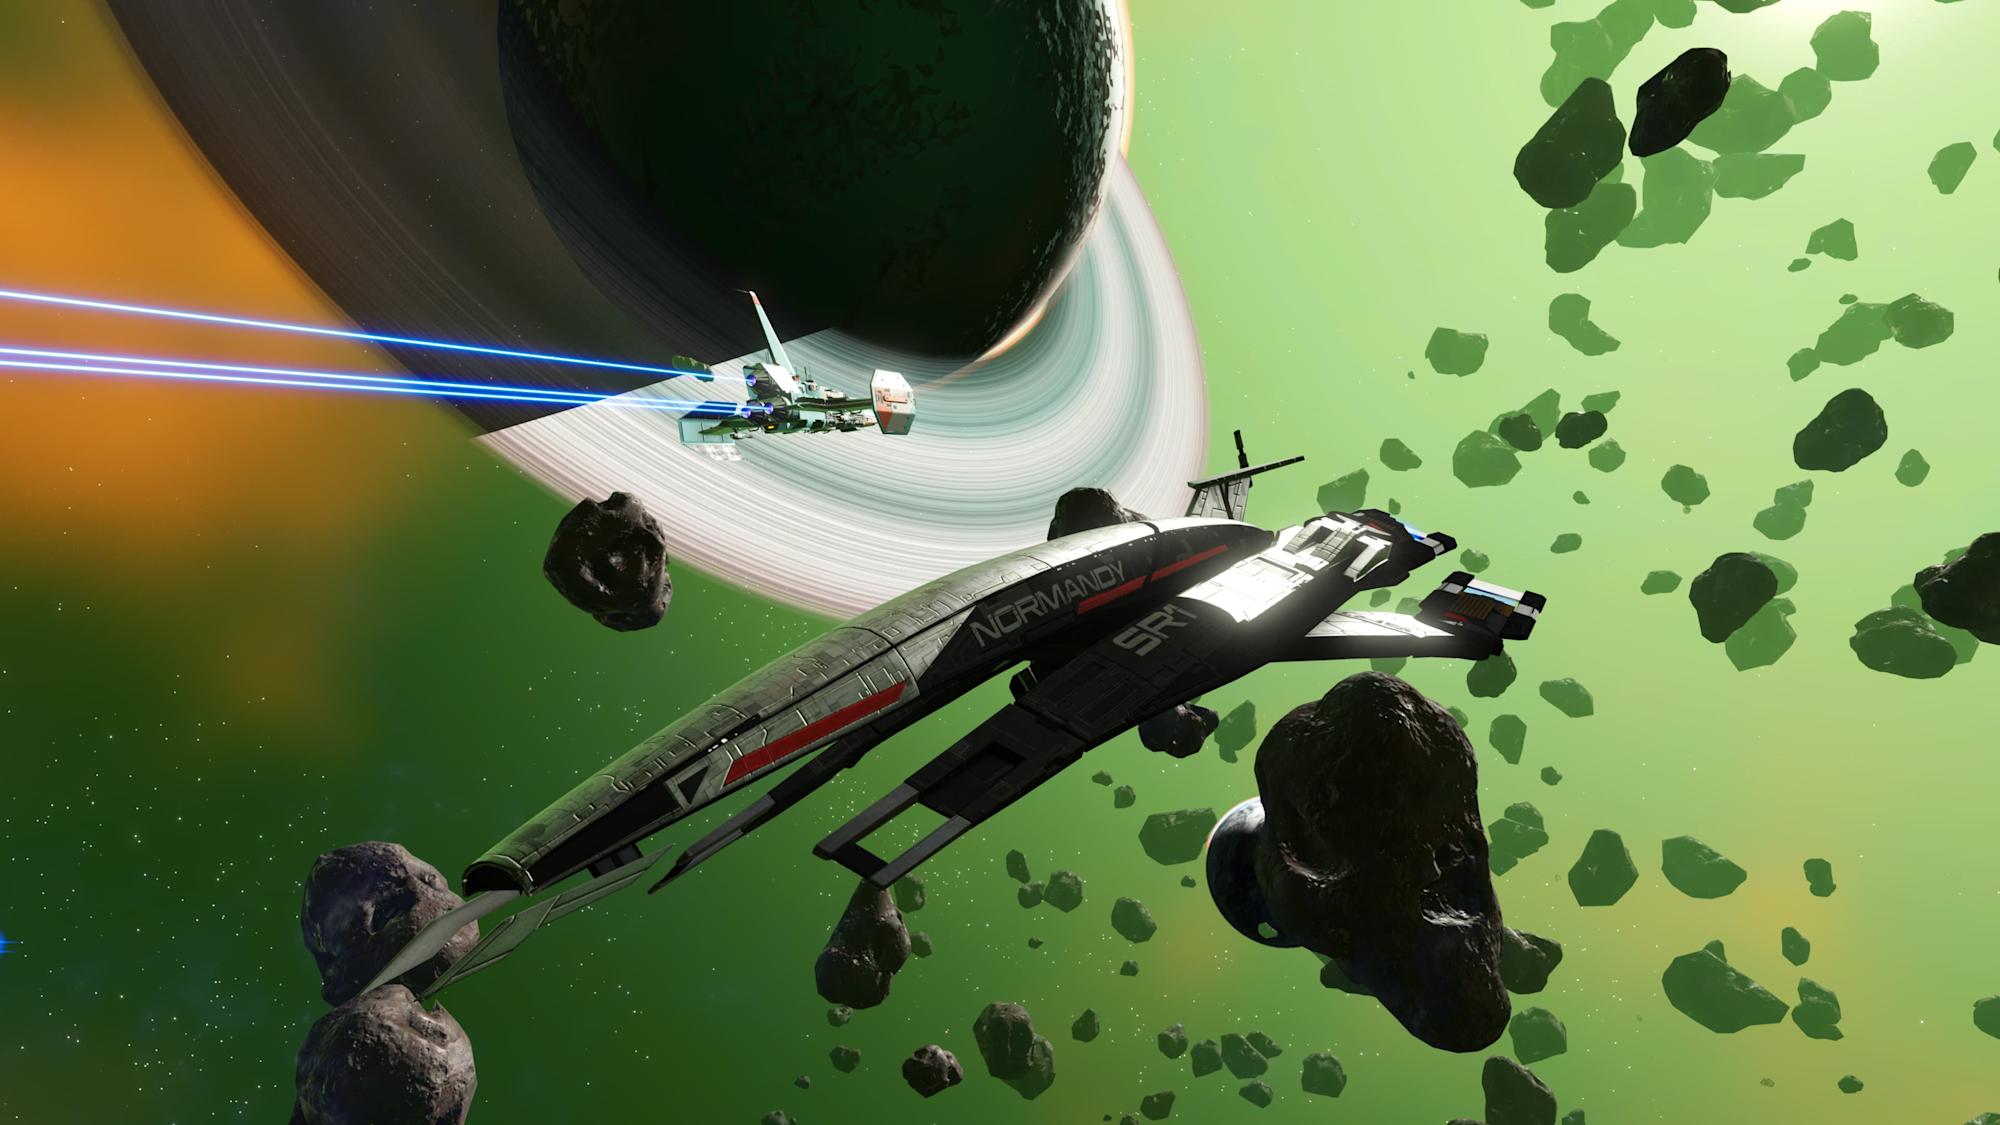 Mass Effect’s Normandy starship is coming to 'No Man's Sky'